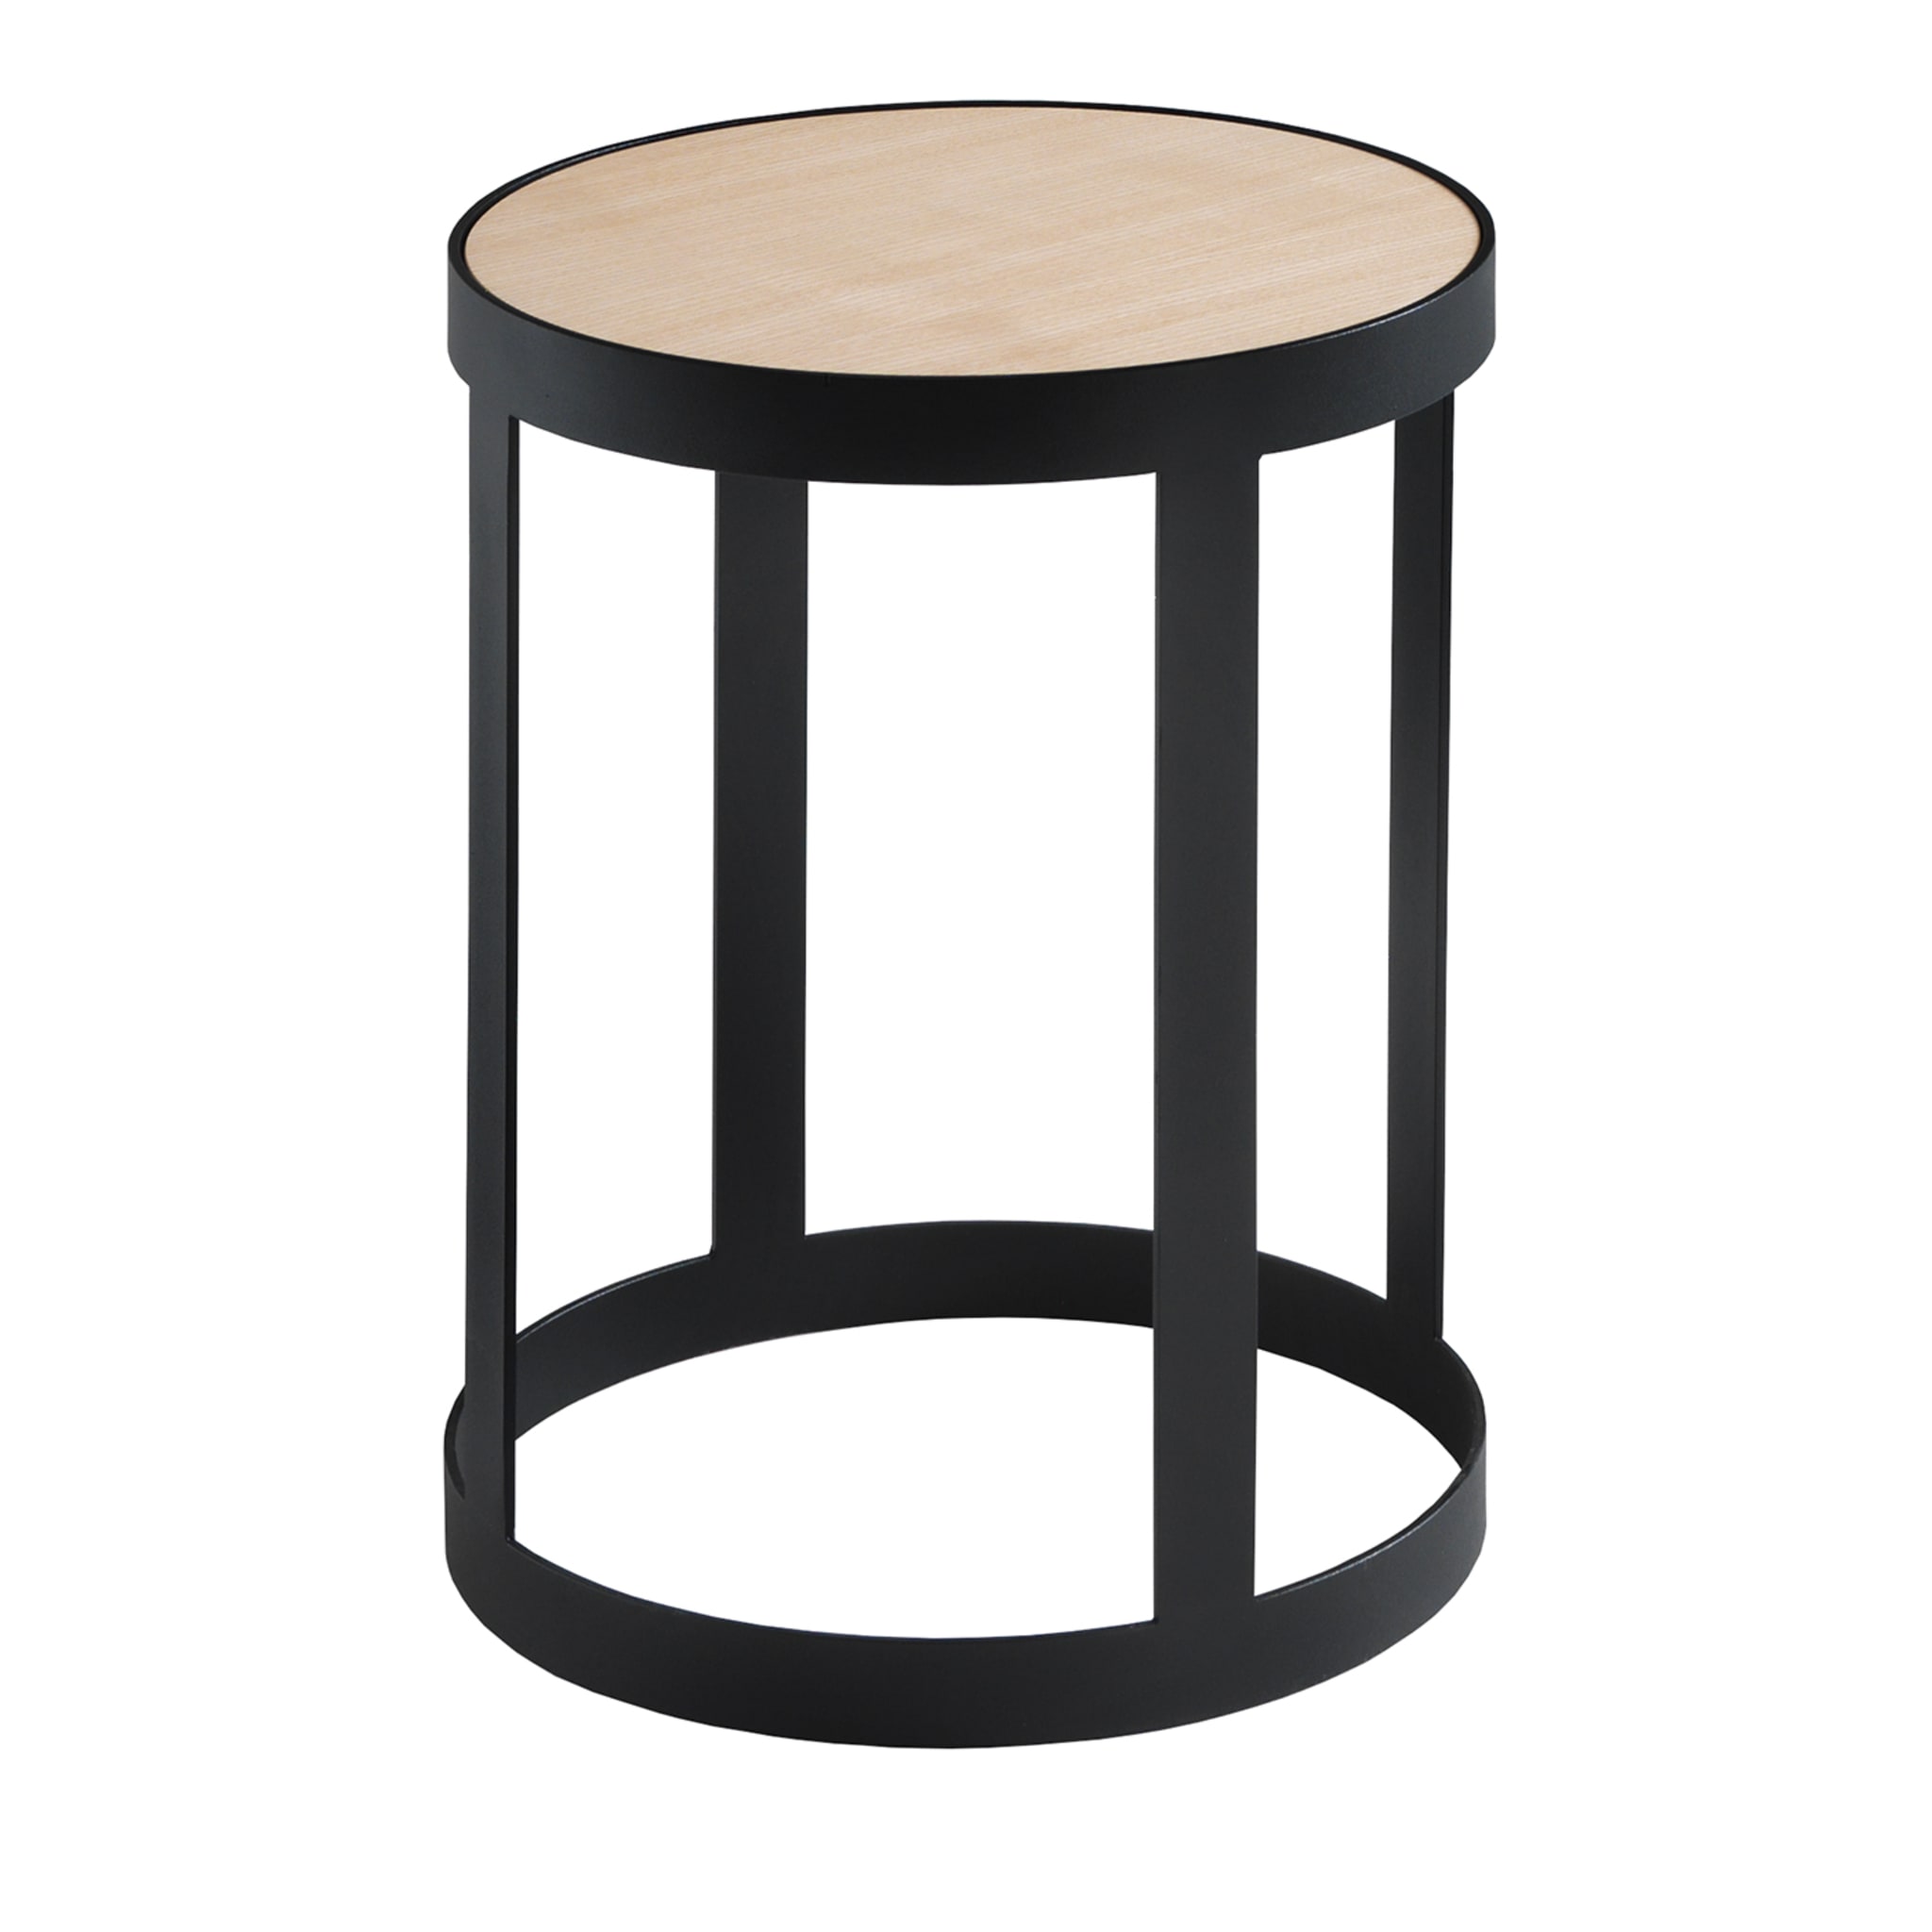 Set of 2 Bea Round Ash & Anthracite-Gray Side Tables - Main view